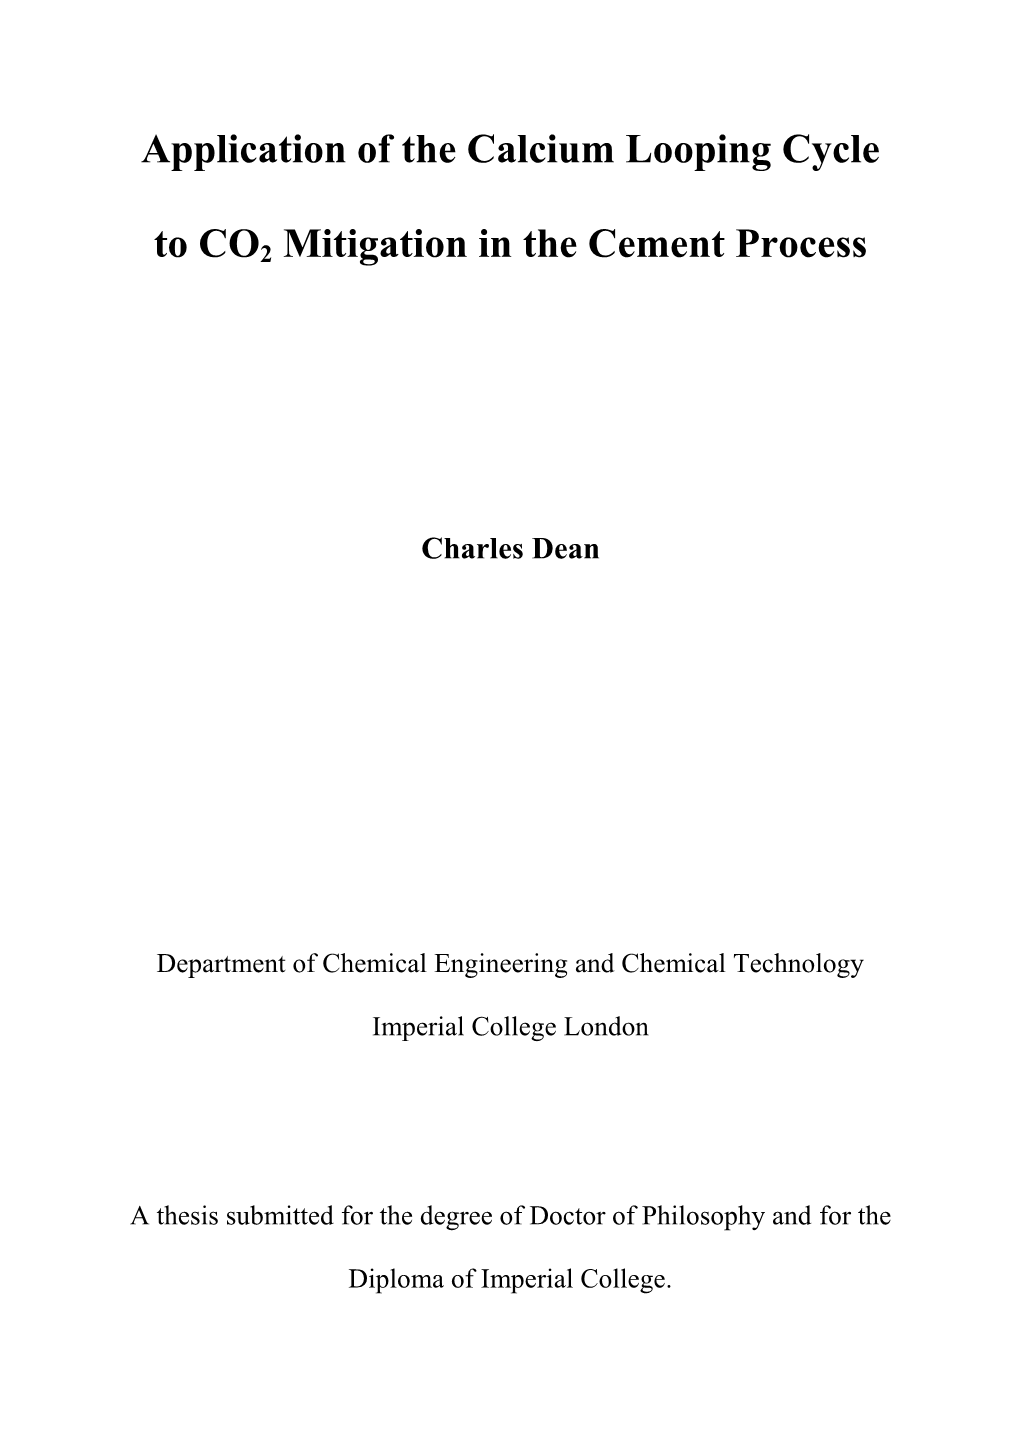 Application of the Calcium Looping Cycle to CO2 Mitigation in The